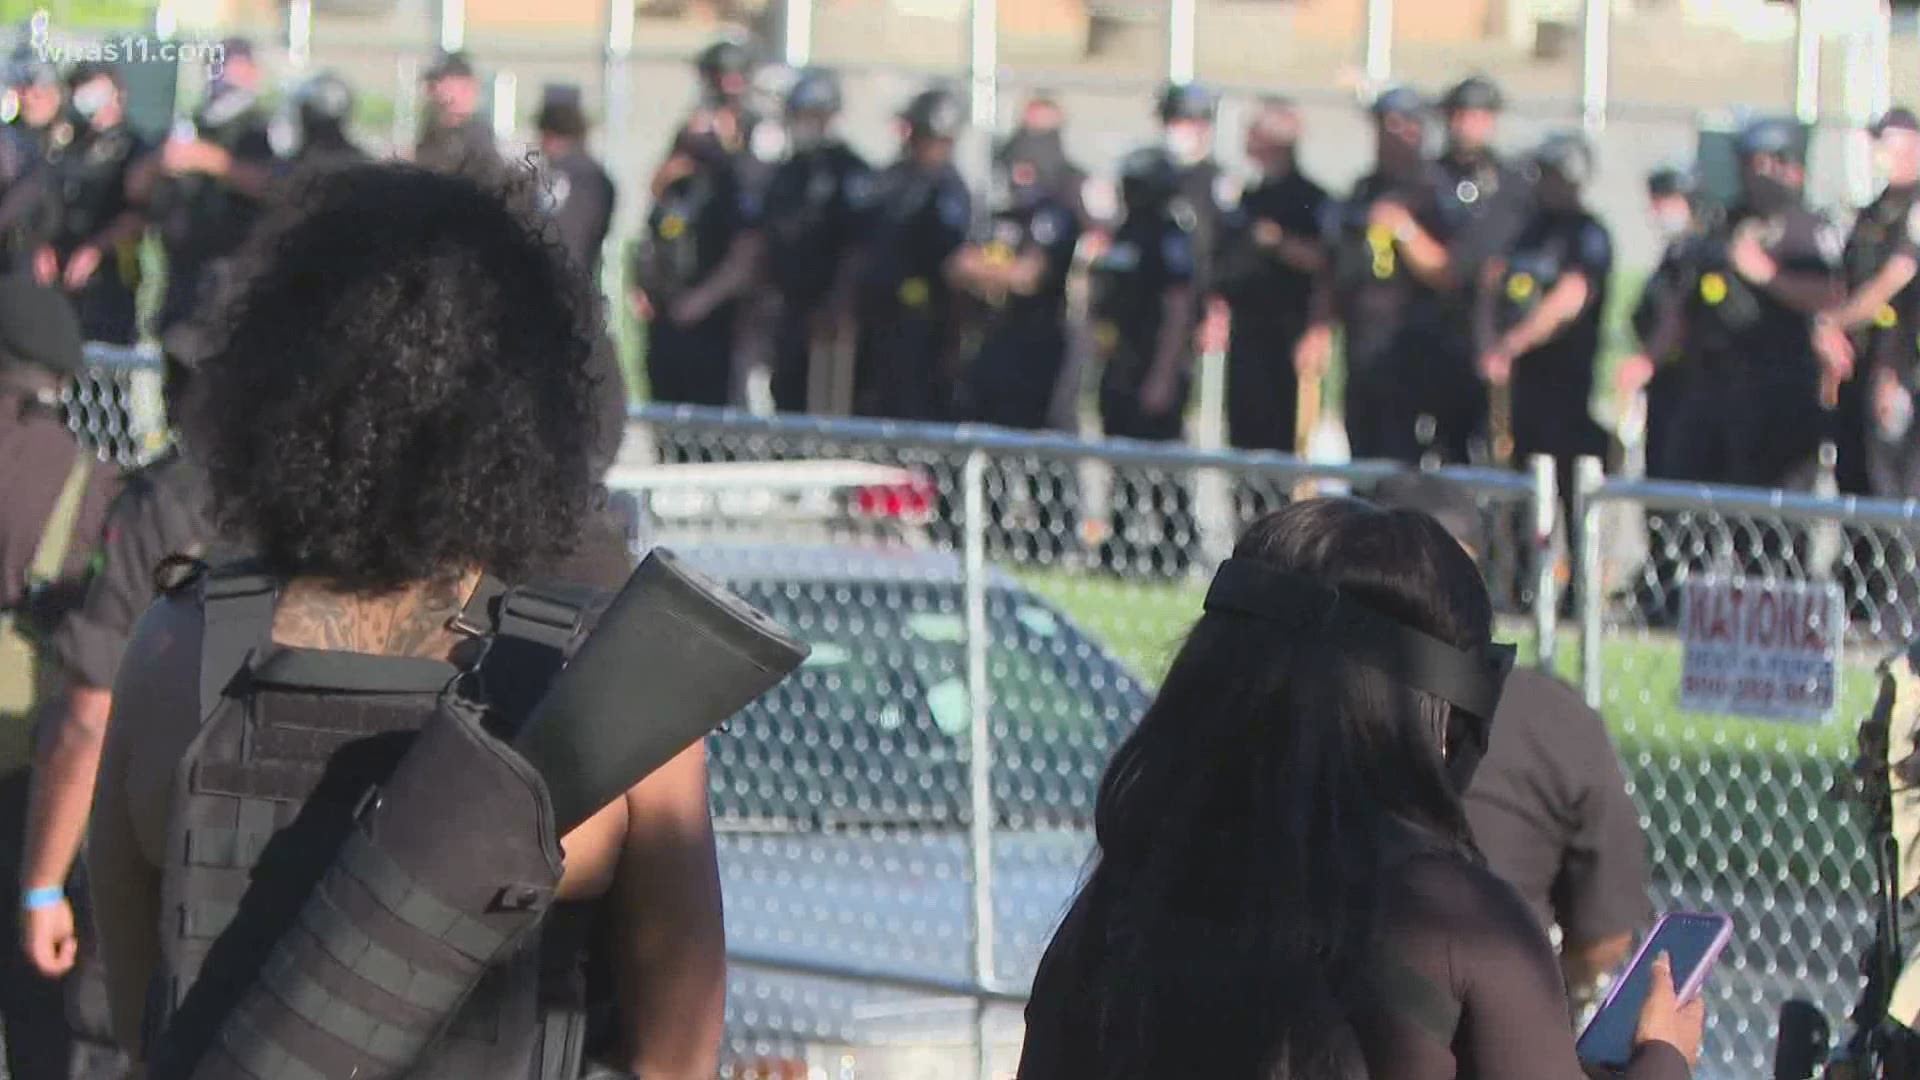 The Black militia group was back in Louisville urging police to use force from across the fence at Churchill Downs as they marched for justice for Breonna Taylor.